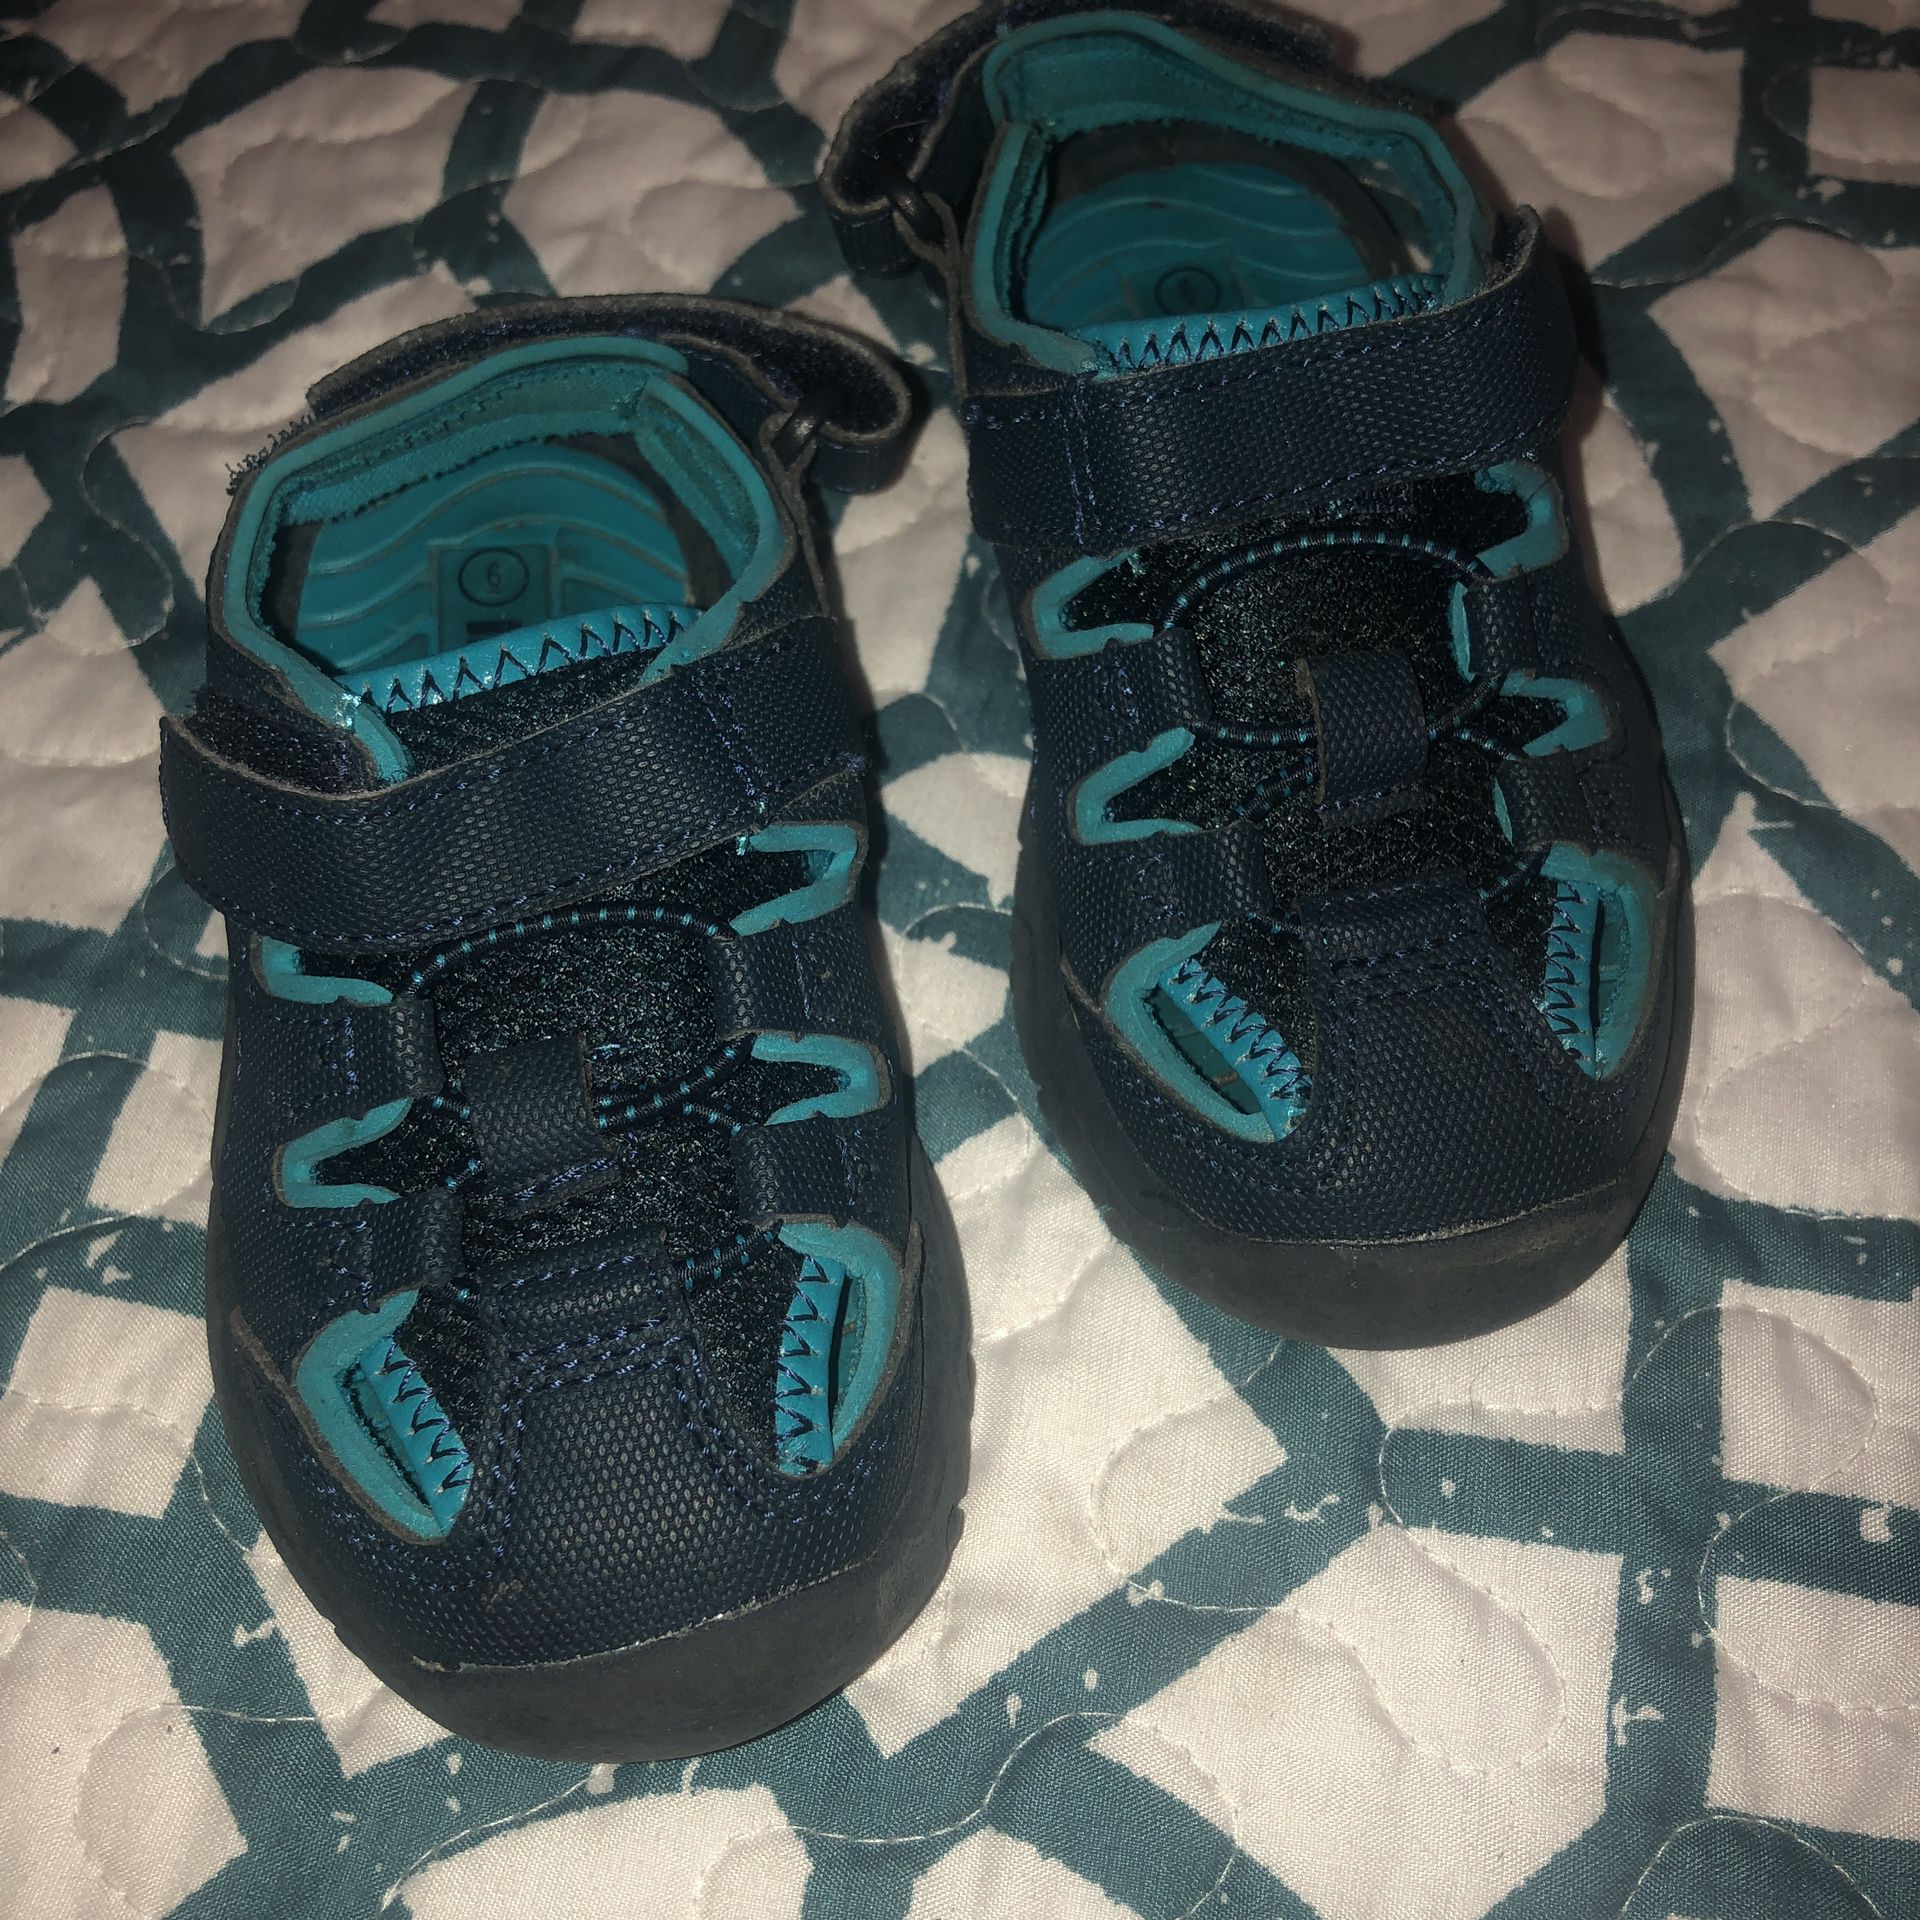 Toddler boy Velcro water shoes/ sandals